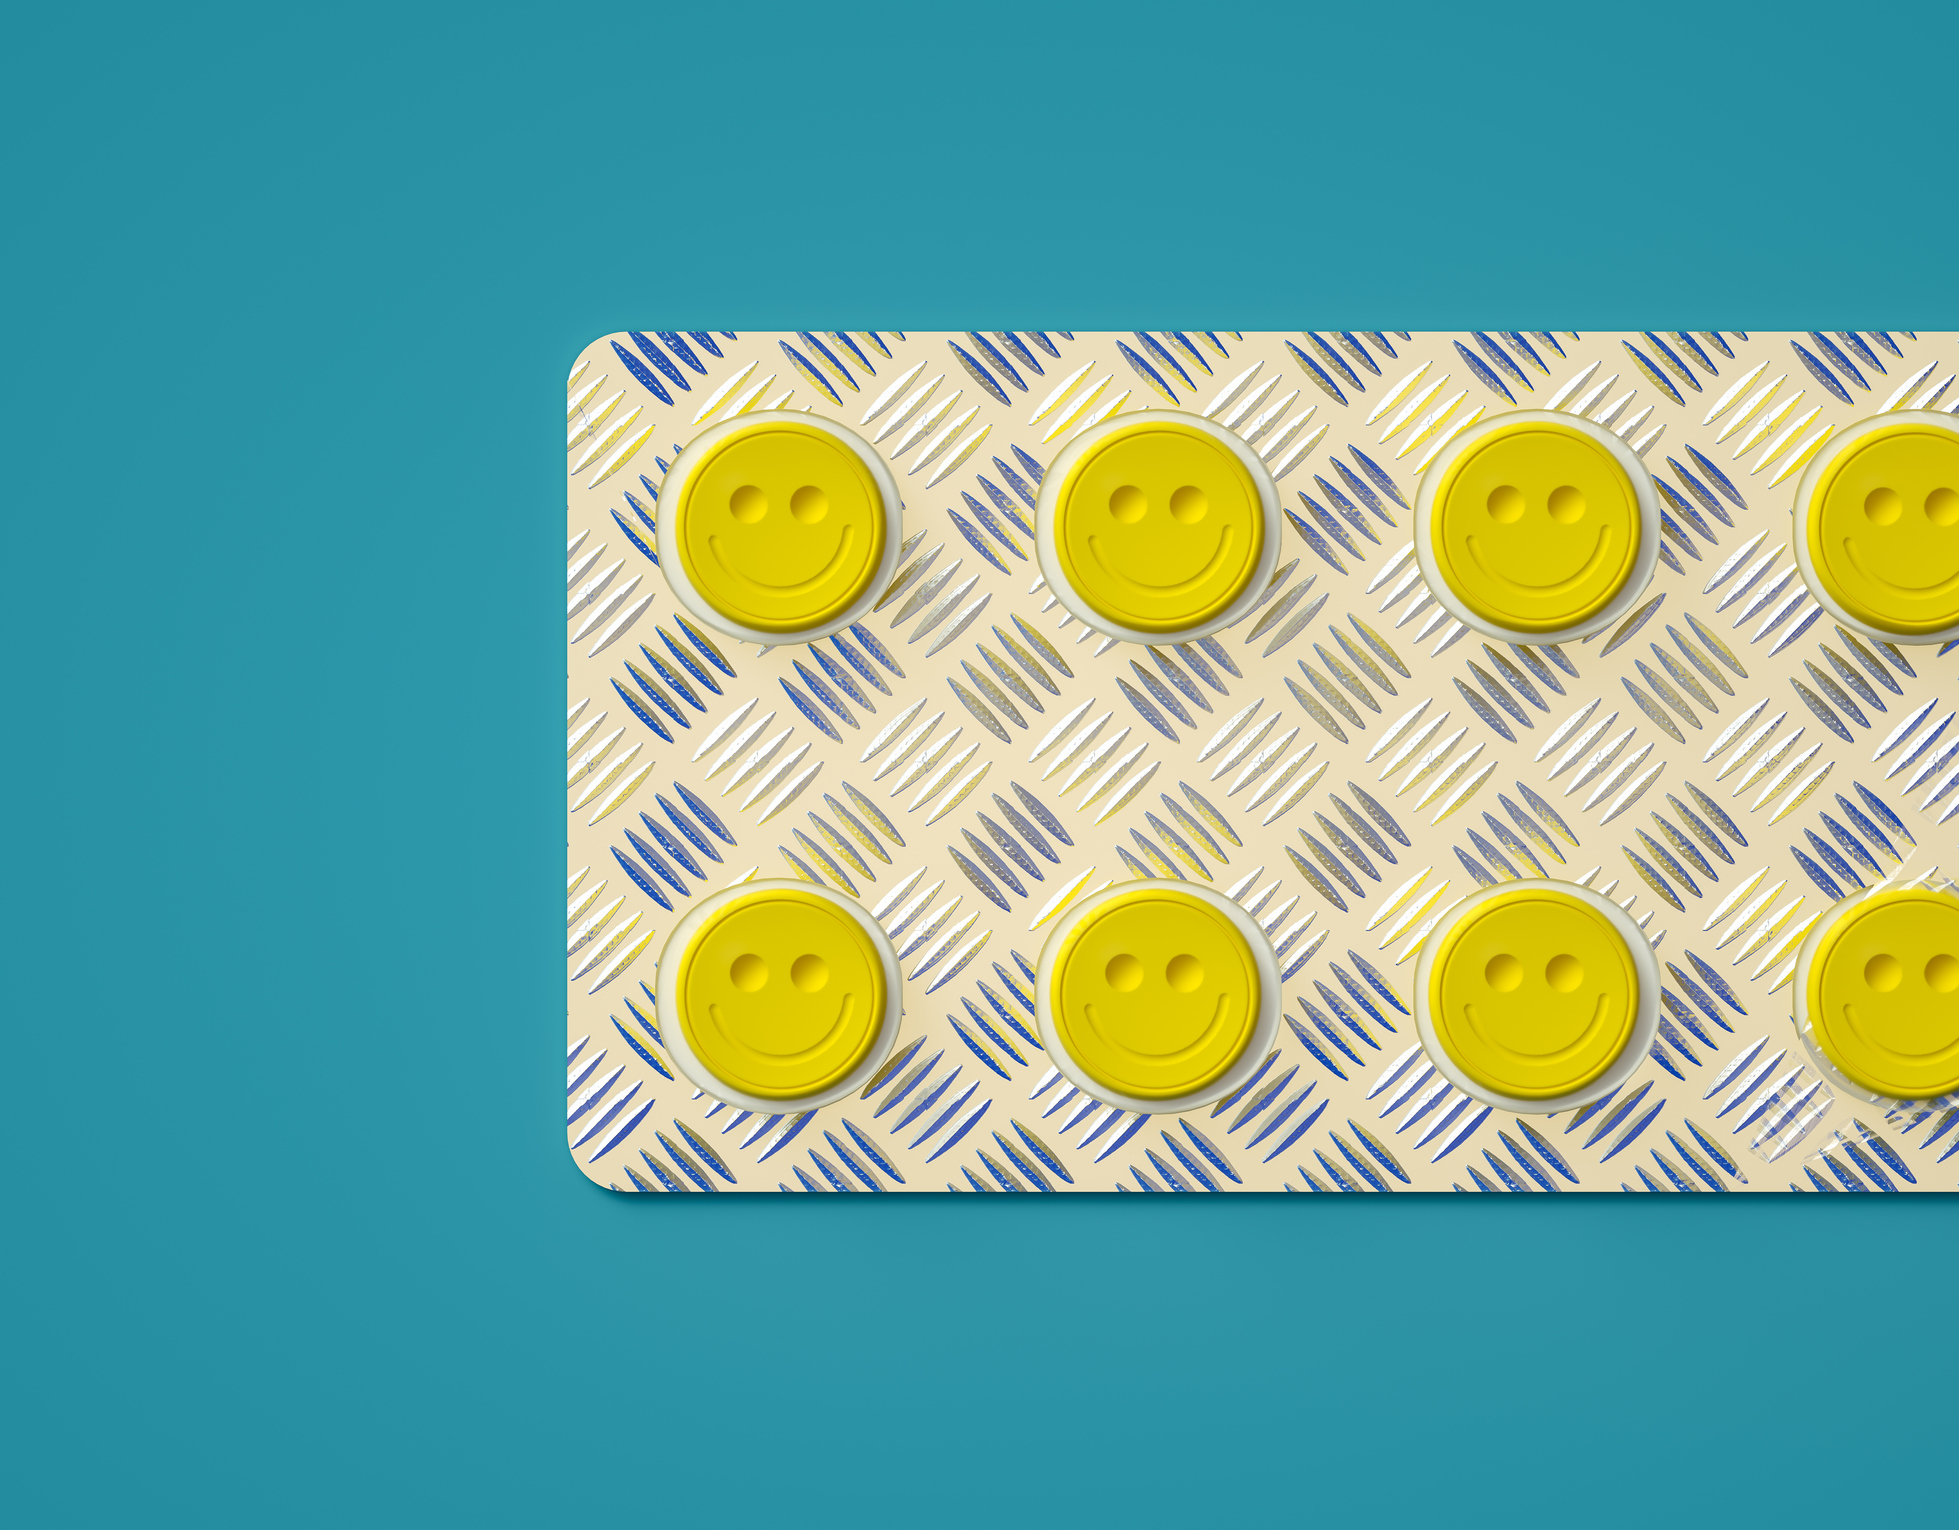 Yellow happy face pills on a patterned background, conveying wellness and positivity